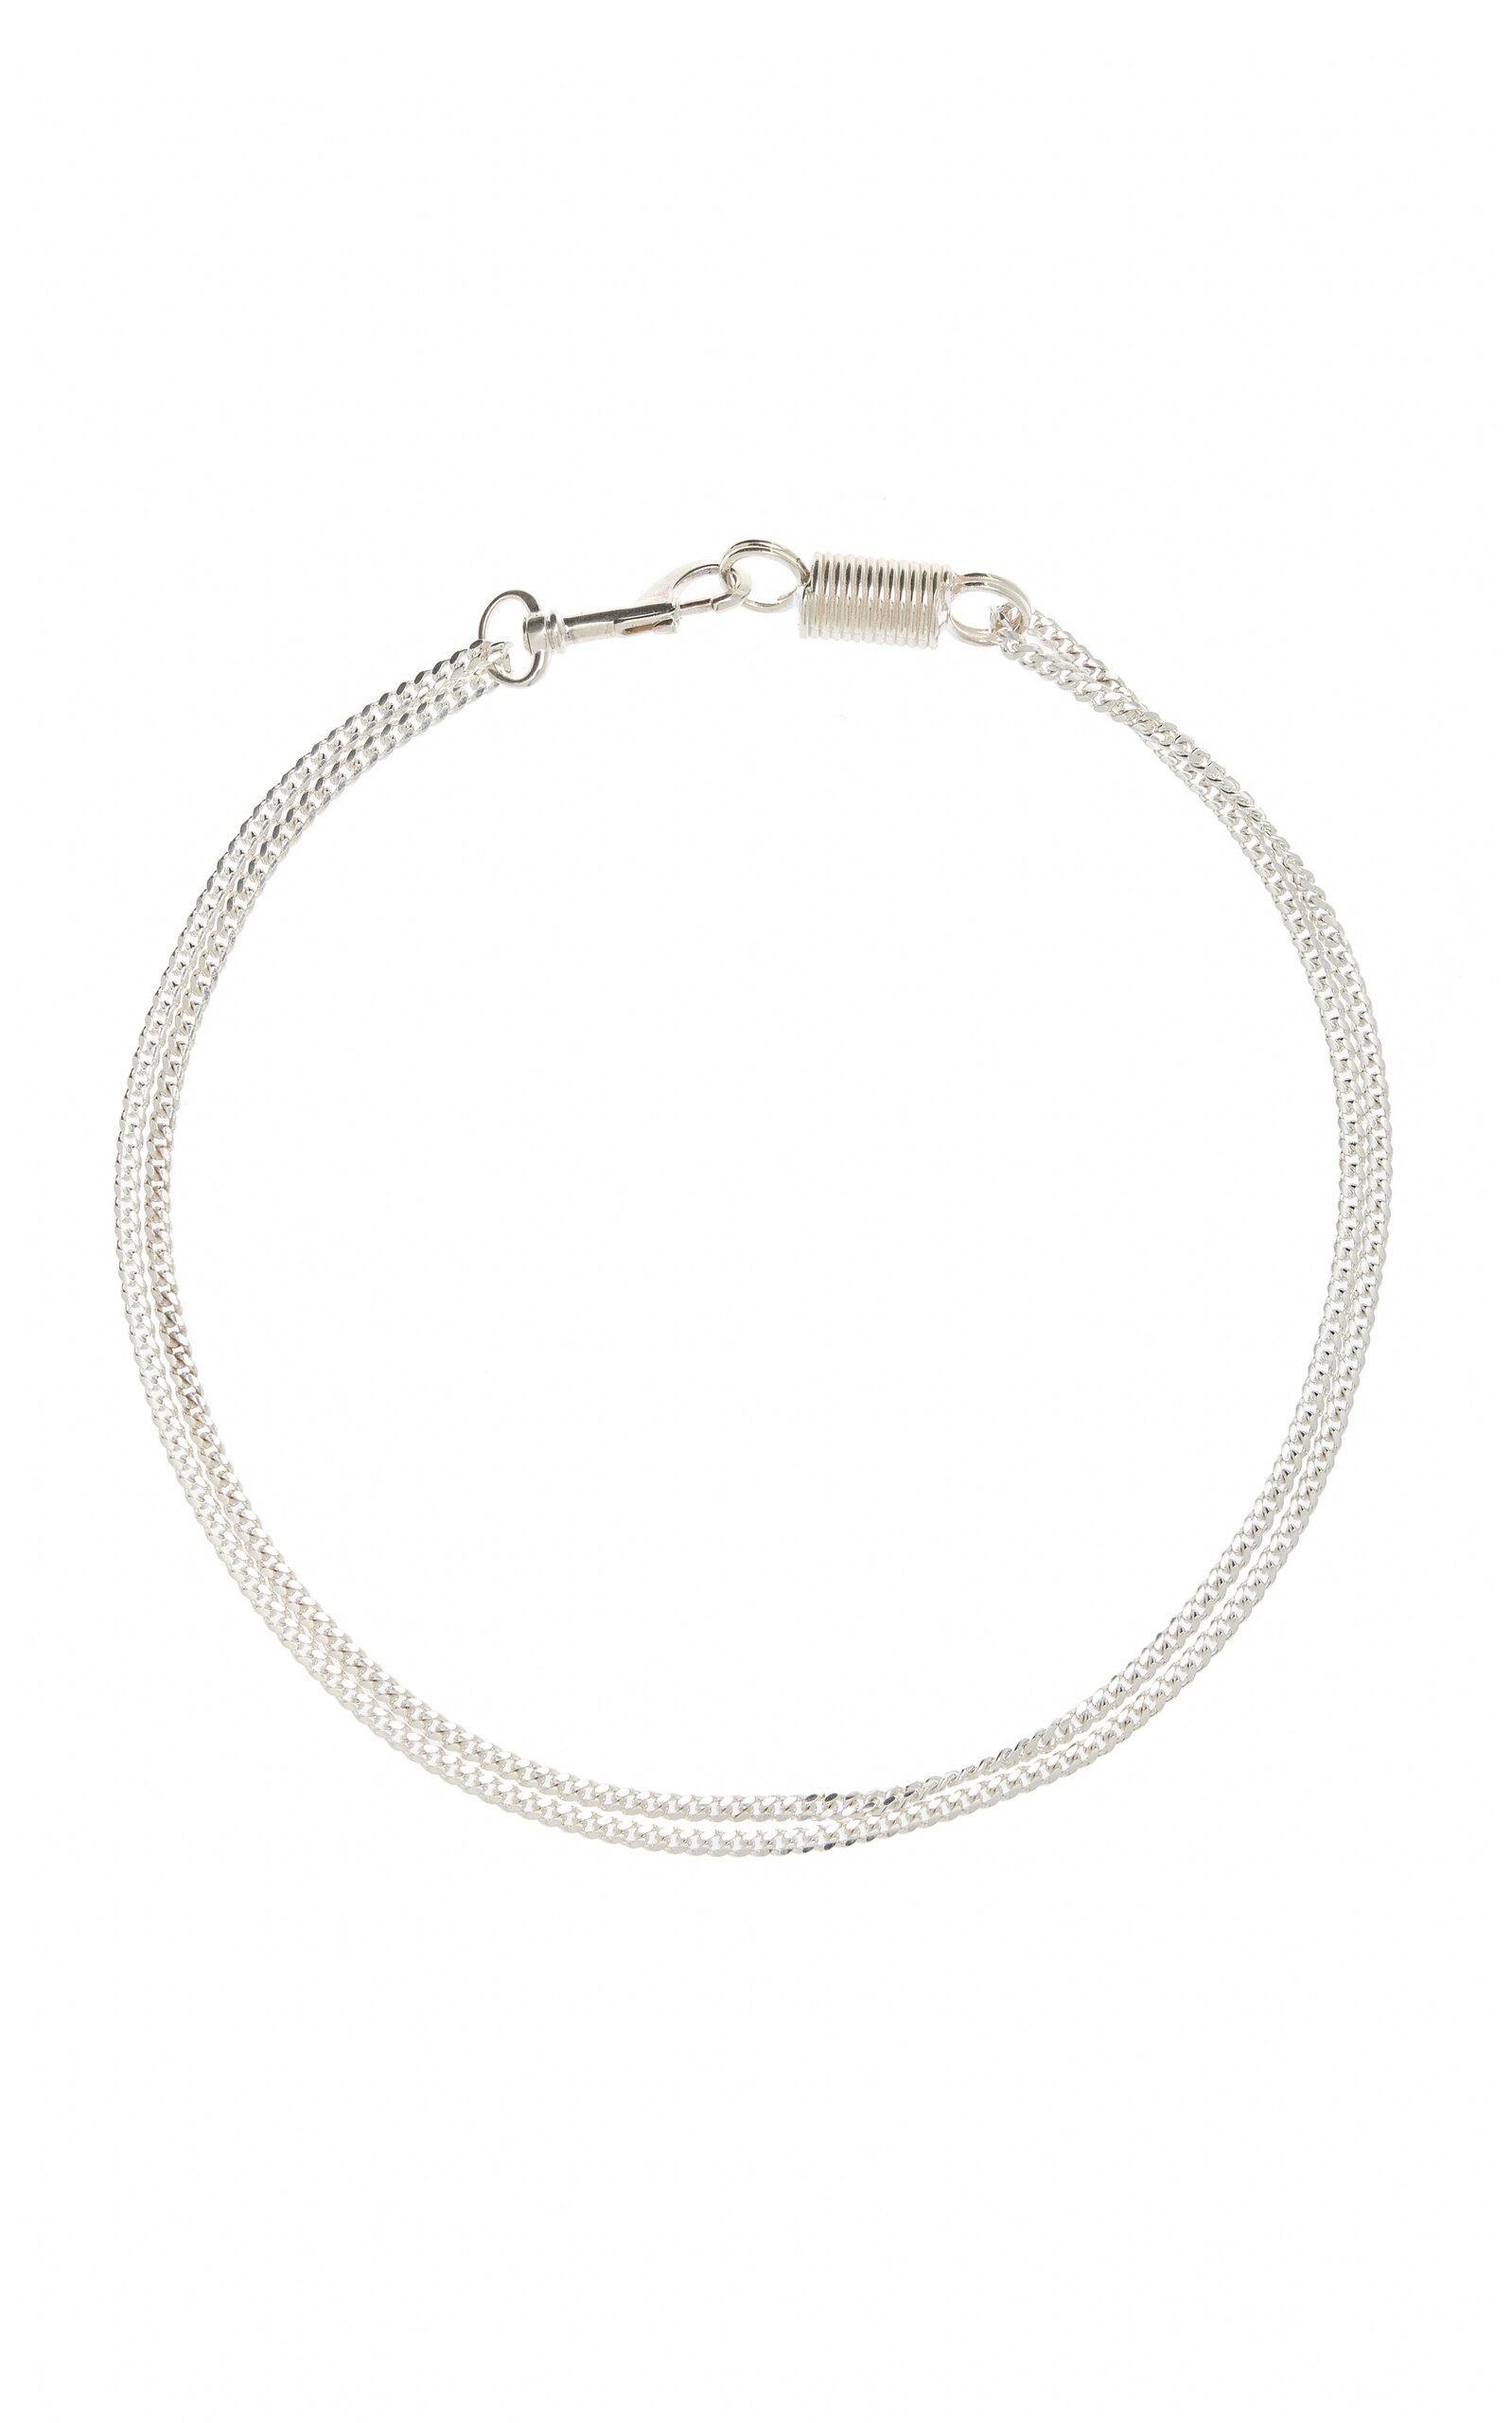 Martine Ali Women's Simple Spring Sterling Silver Necklace